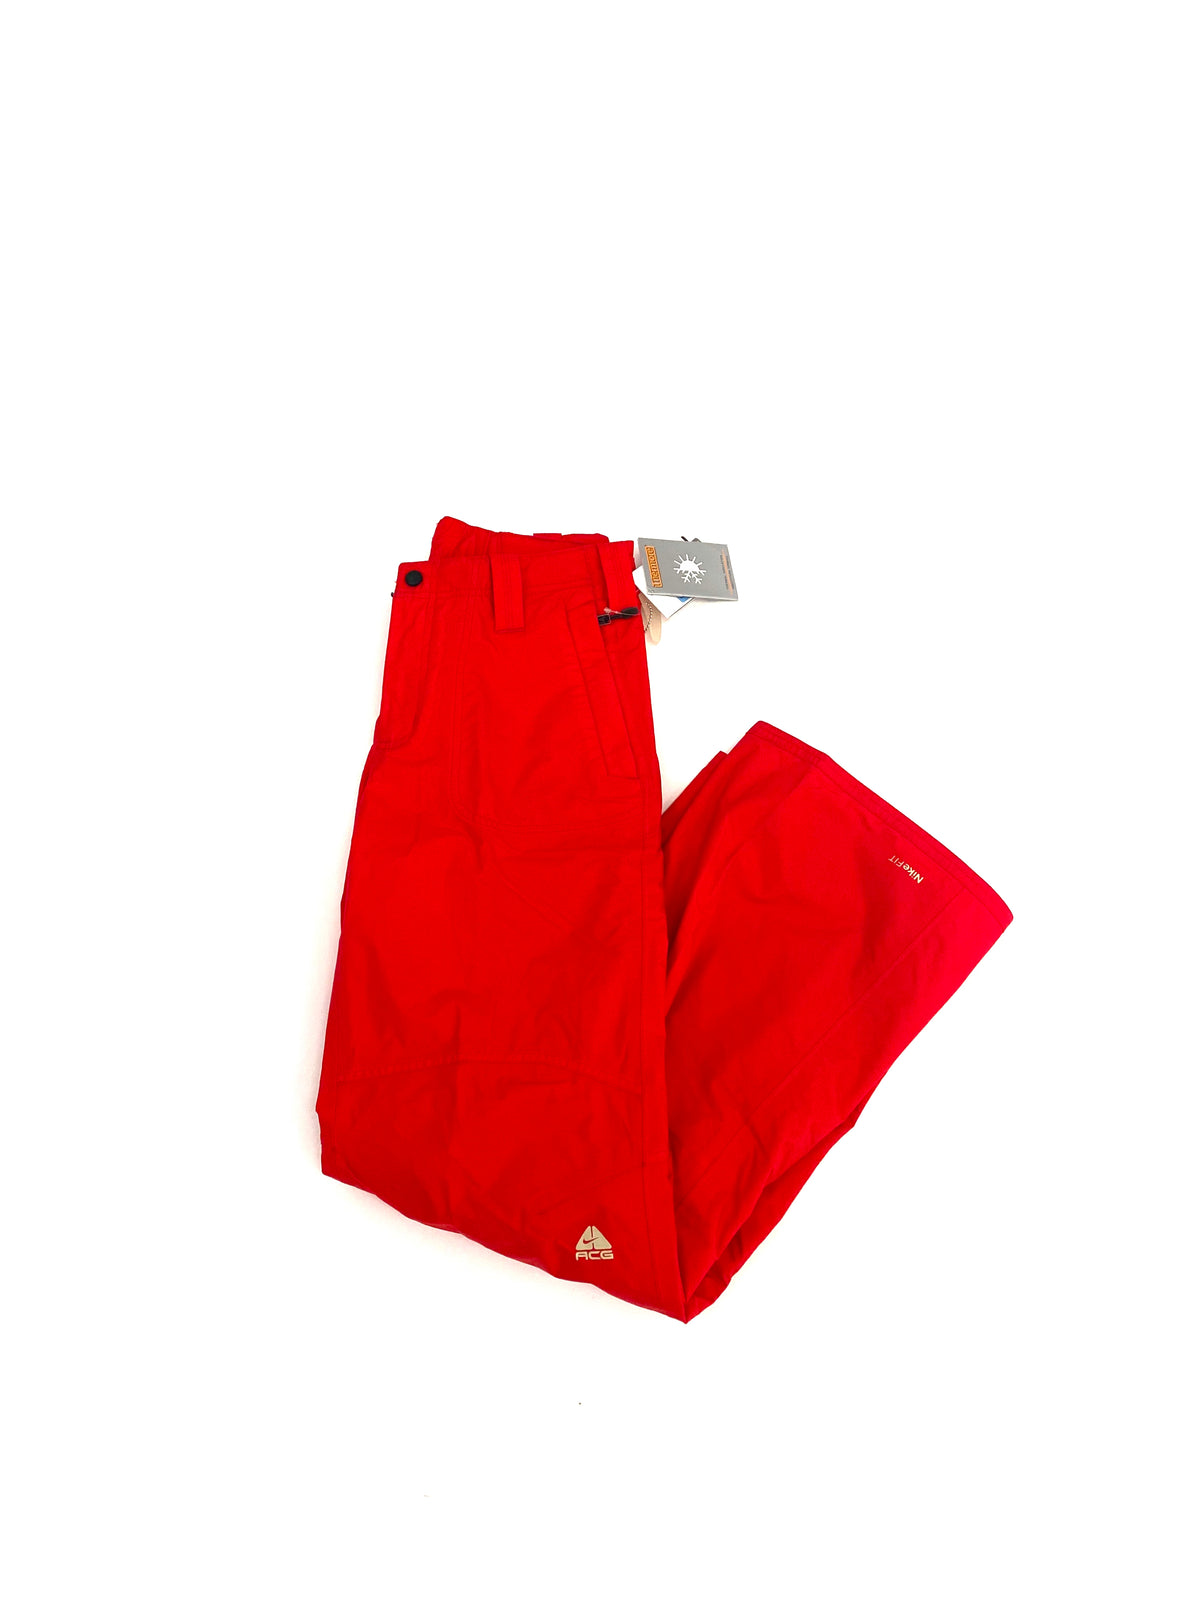 DEADSTOCK 2006 NIKE ACG STORM FIT SKI PANTS / TROUSERS - RED